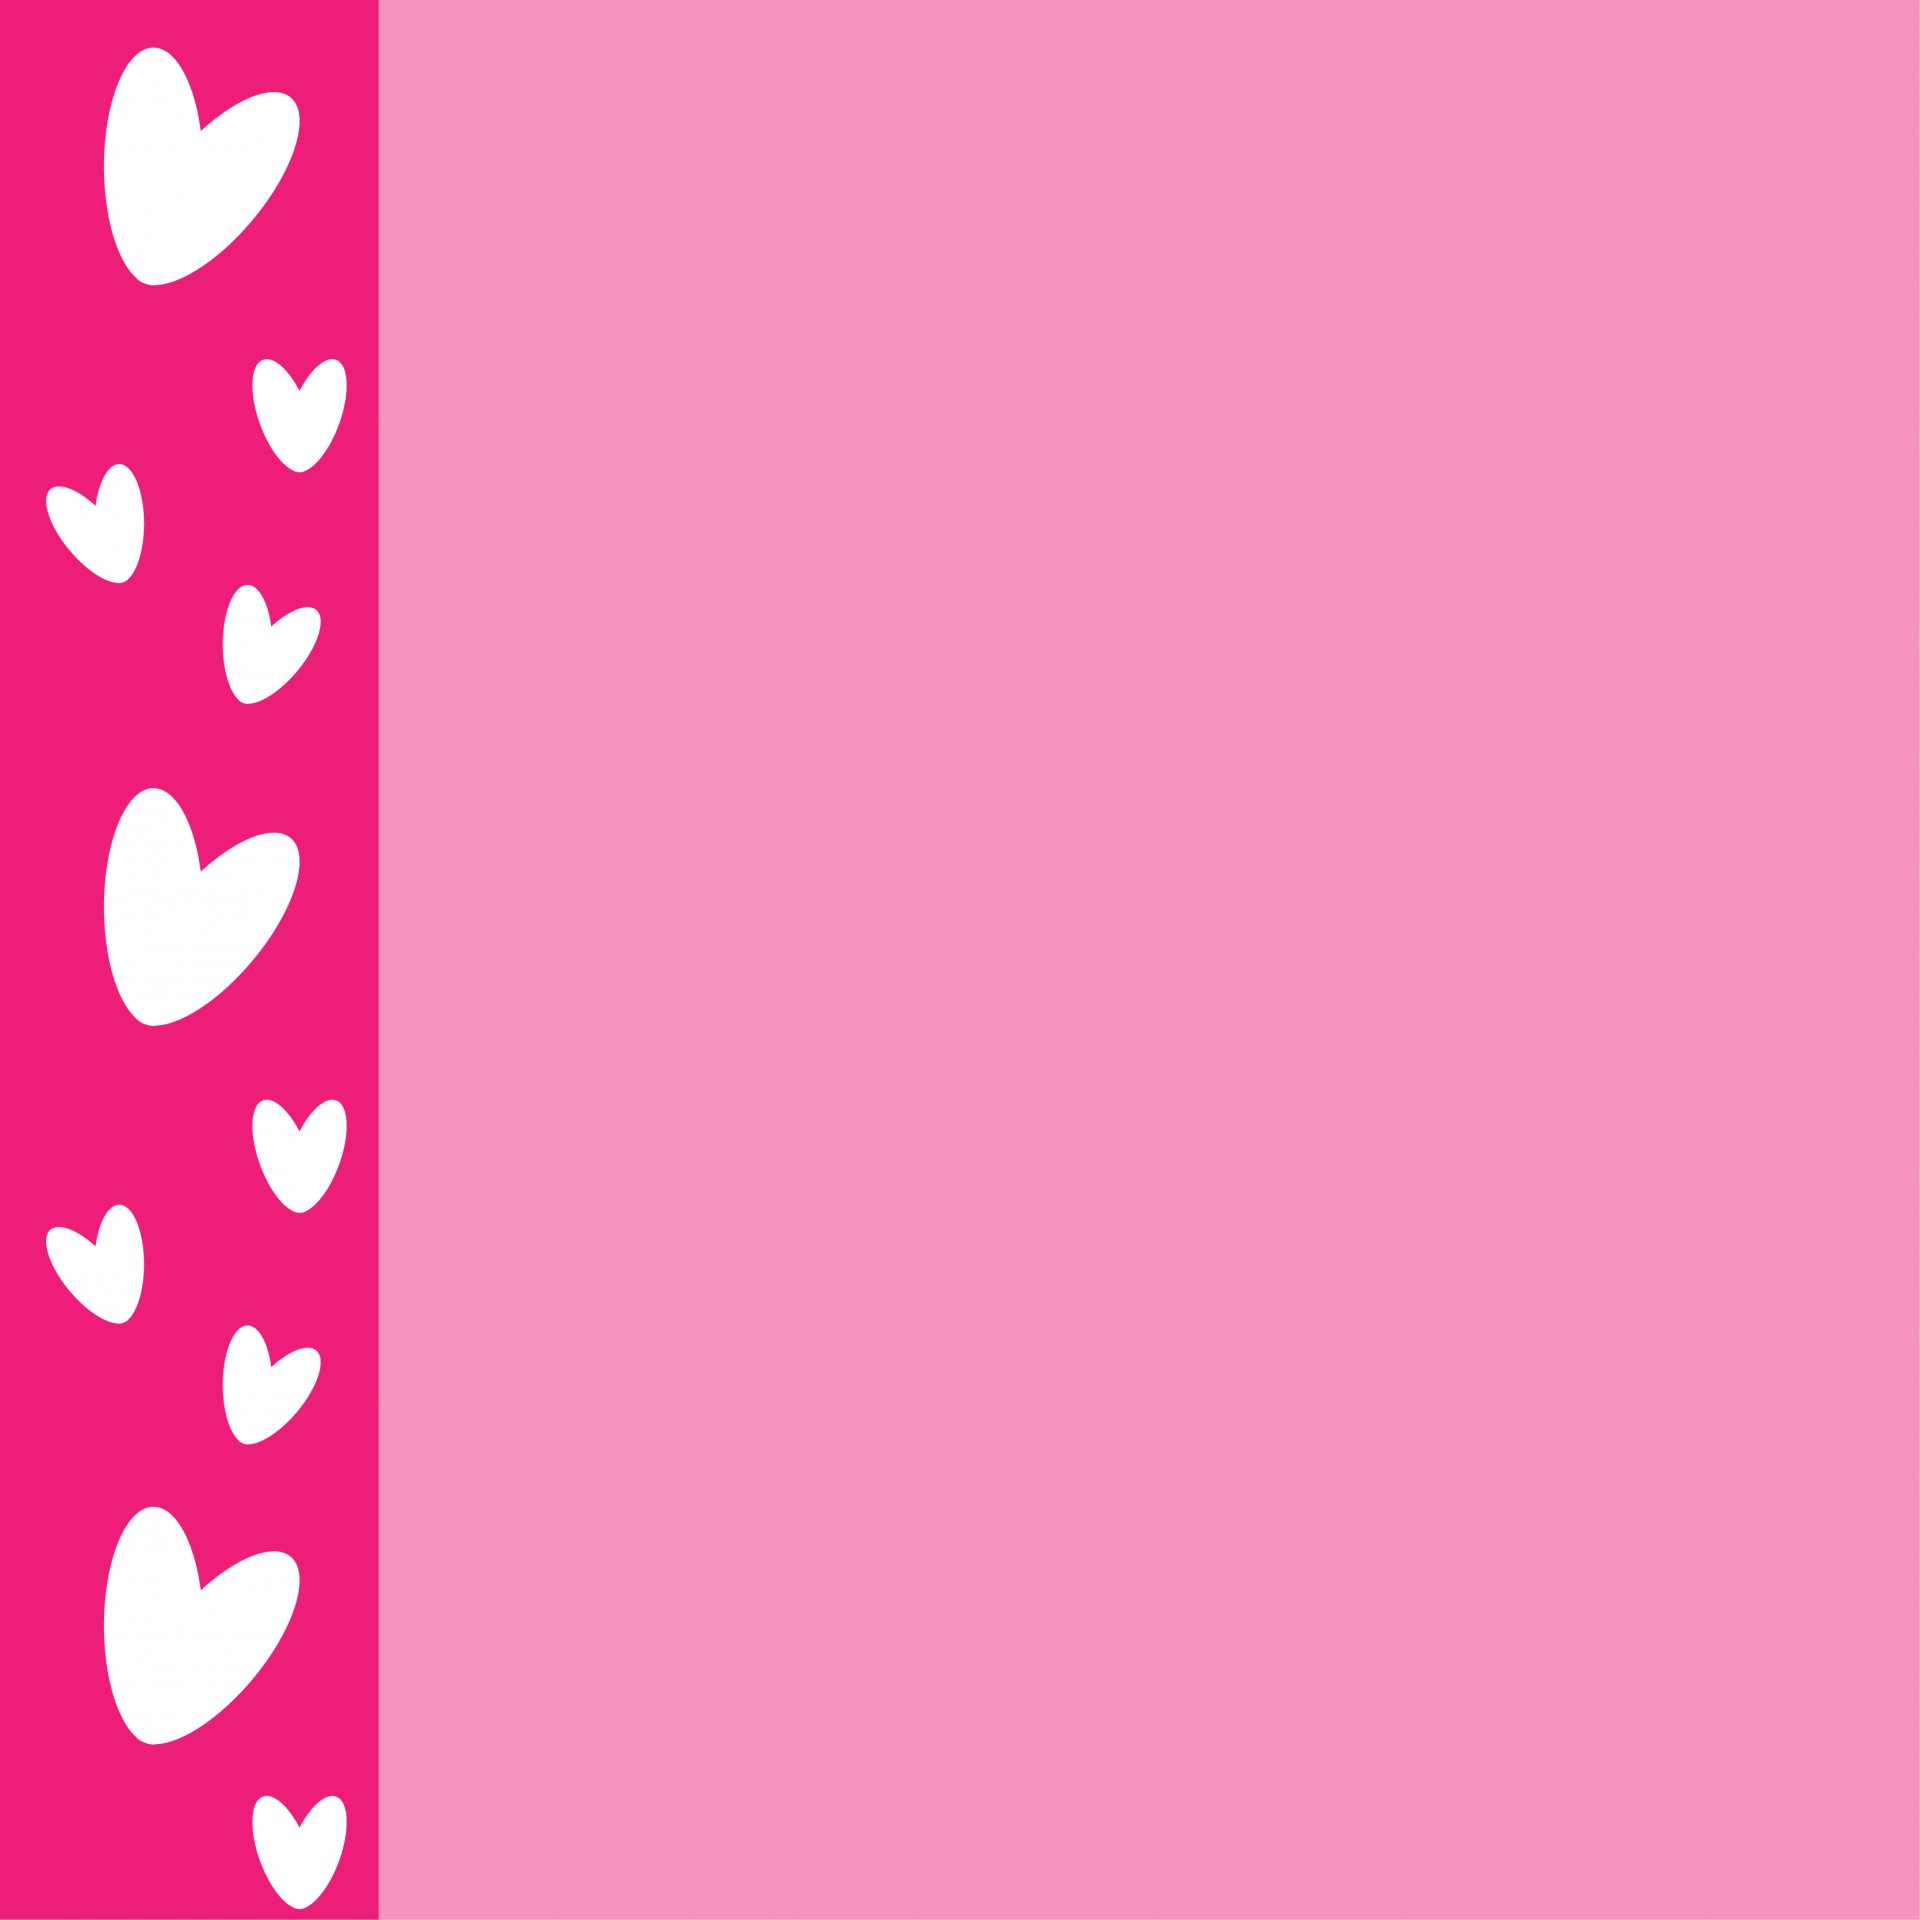 Pink Hearts Card Free Stock Photo - Public Domain Pictures1920 x 1920